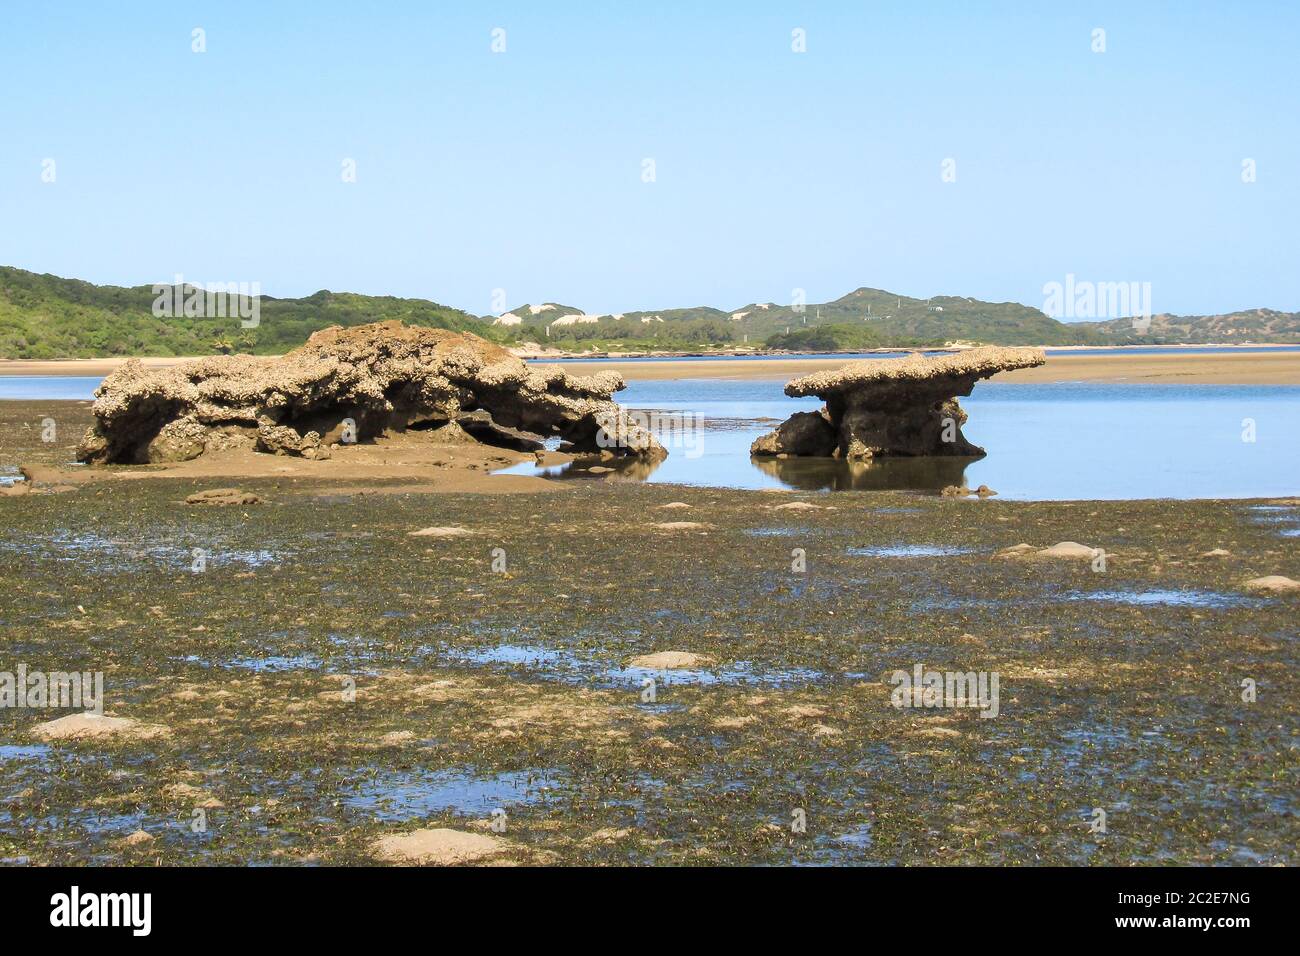 Tidal flat during low tide at KaNyaka Island, in Southern Mozambique, covered in seagrass with weathered beach rock formations in the background Stock Photo